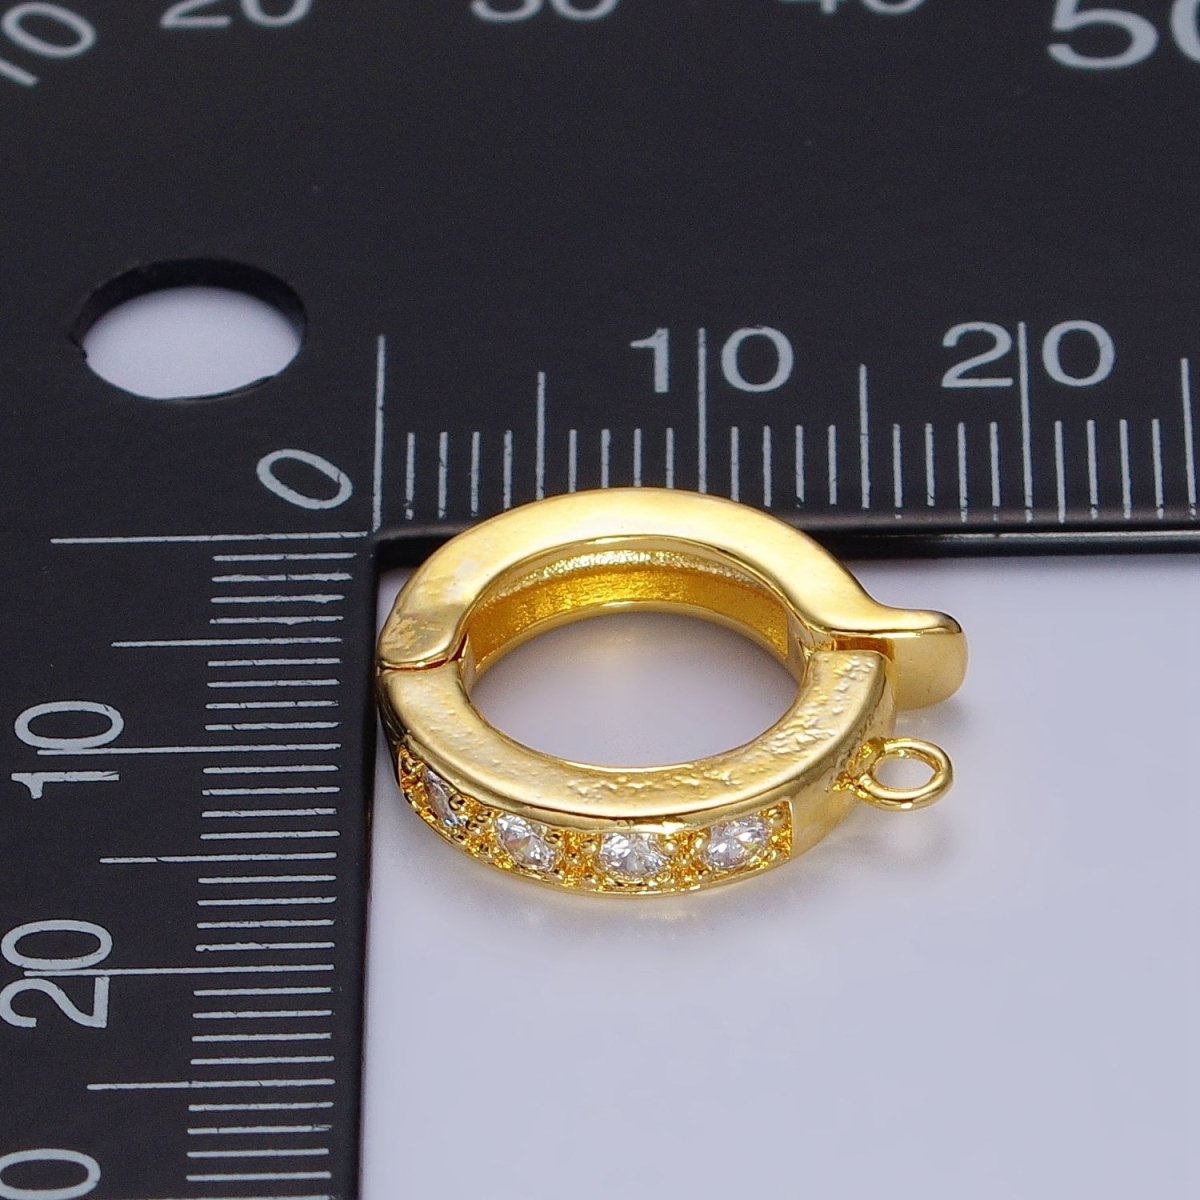 Gold CZ Pull Gate Ring Clasp, Fance Gate Clasp, Pull Clasp with Closed link for Charm Holder Necklace Jewelry Making Supply | Z-074 Z-075 - DLUXCA